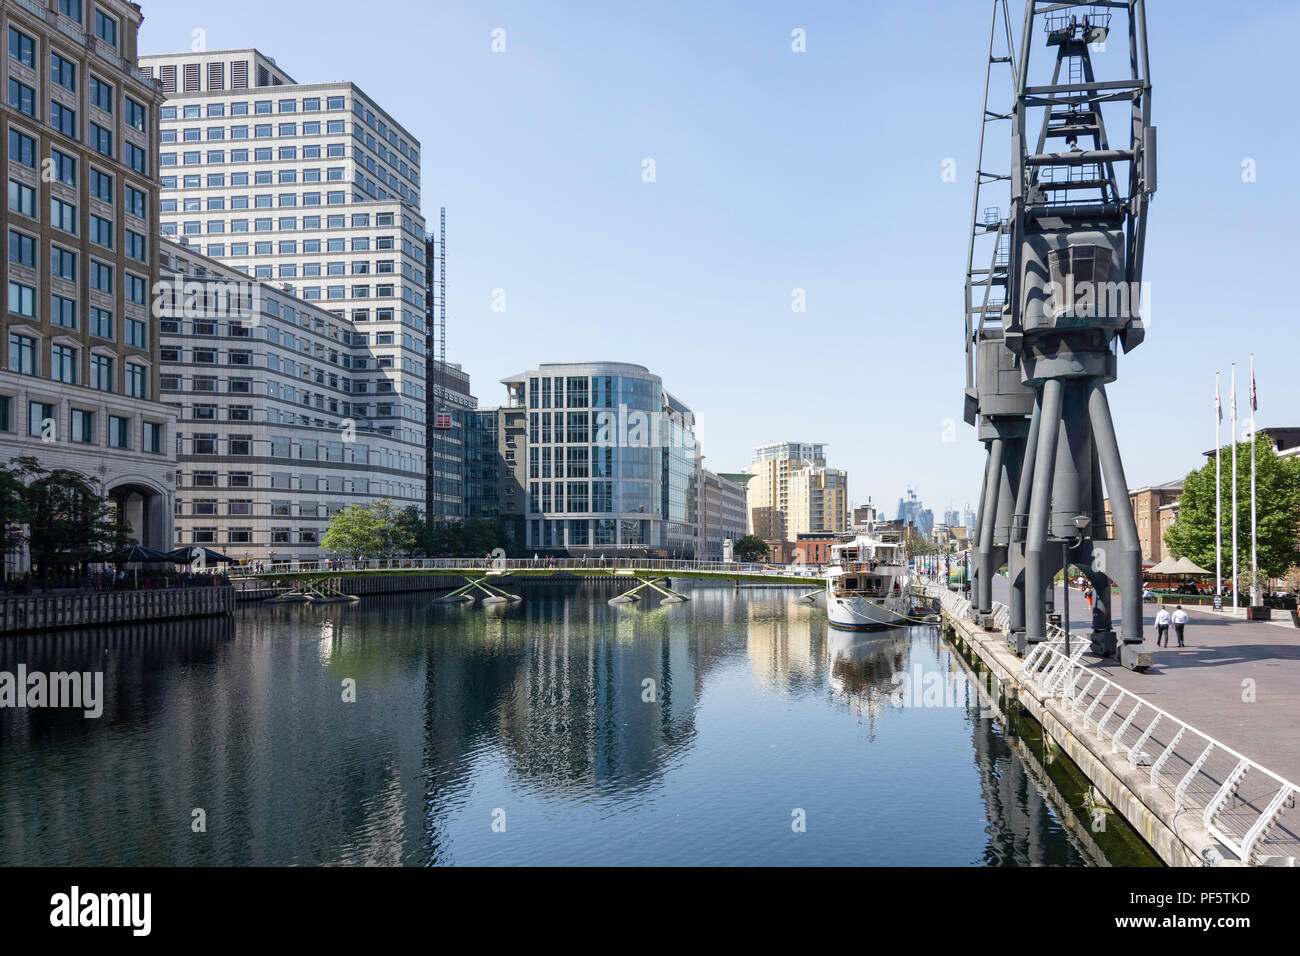 Nord Dock Canal, Canary Wharf, London Borough of Tower Hamlets, Greater London, England, Regno Unito Foto Stock